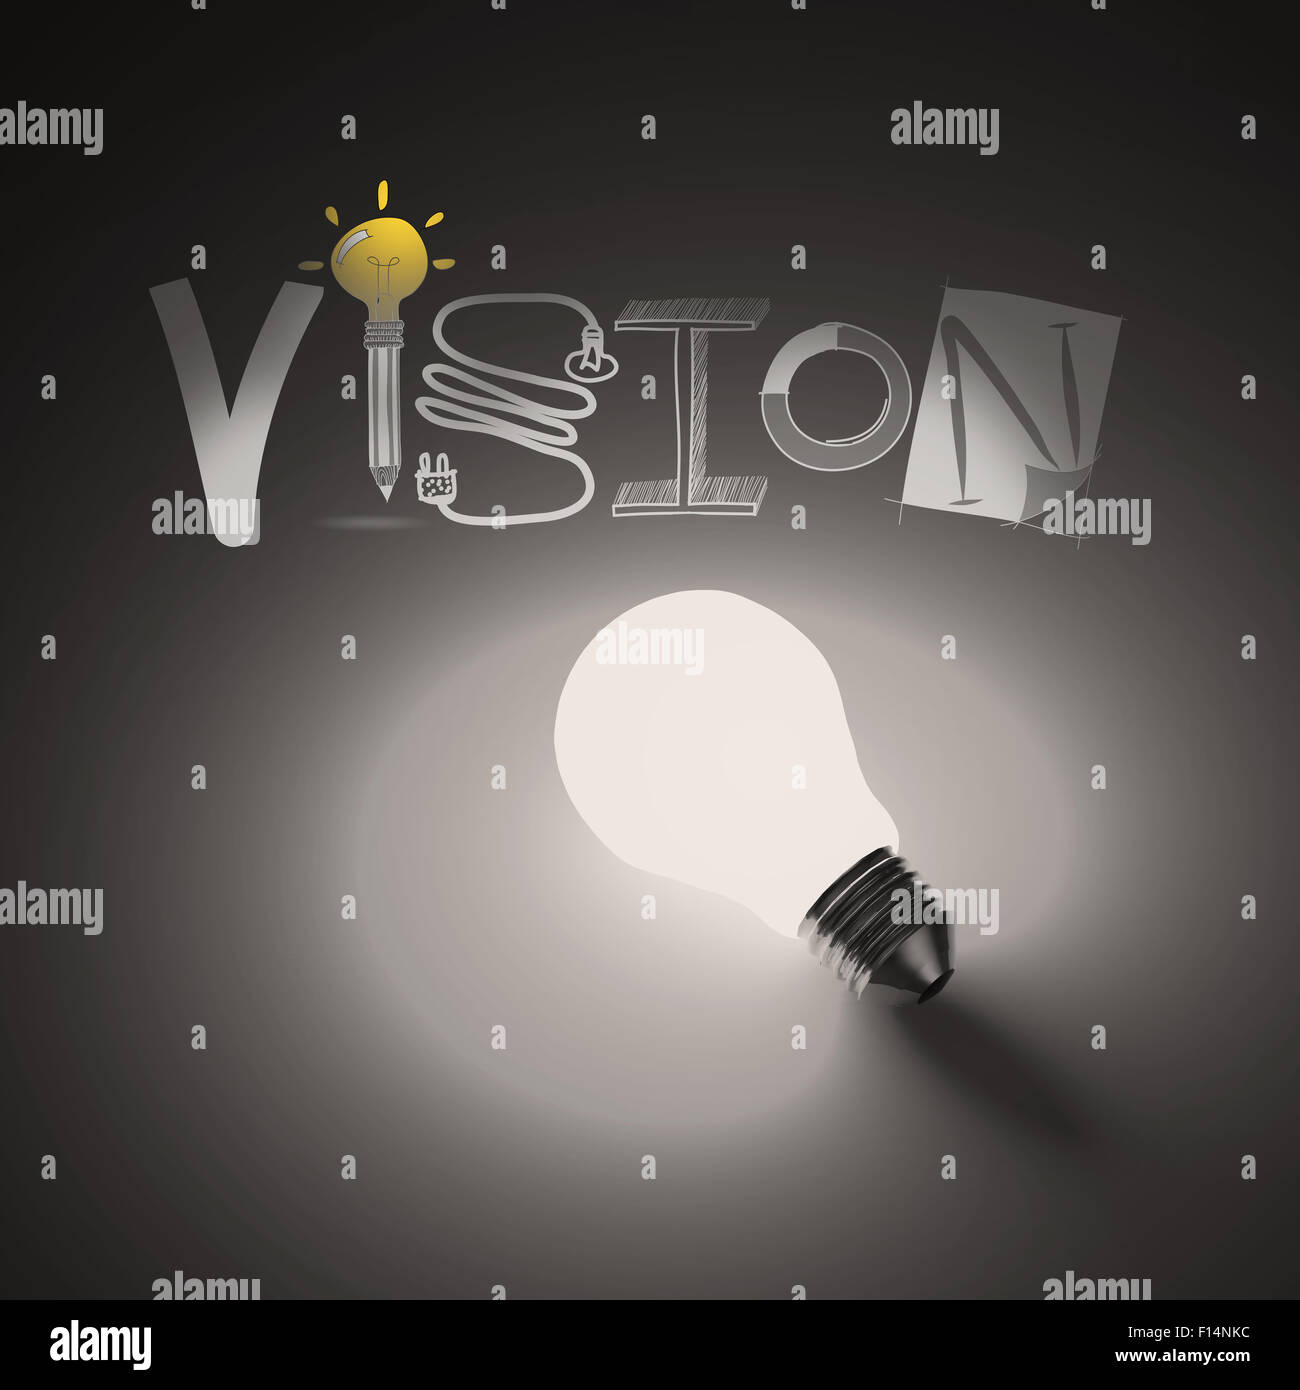 light bulb 3d and hand drawn graphic design word VISION  as concept Stock Photo